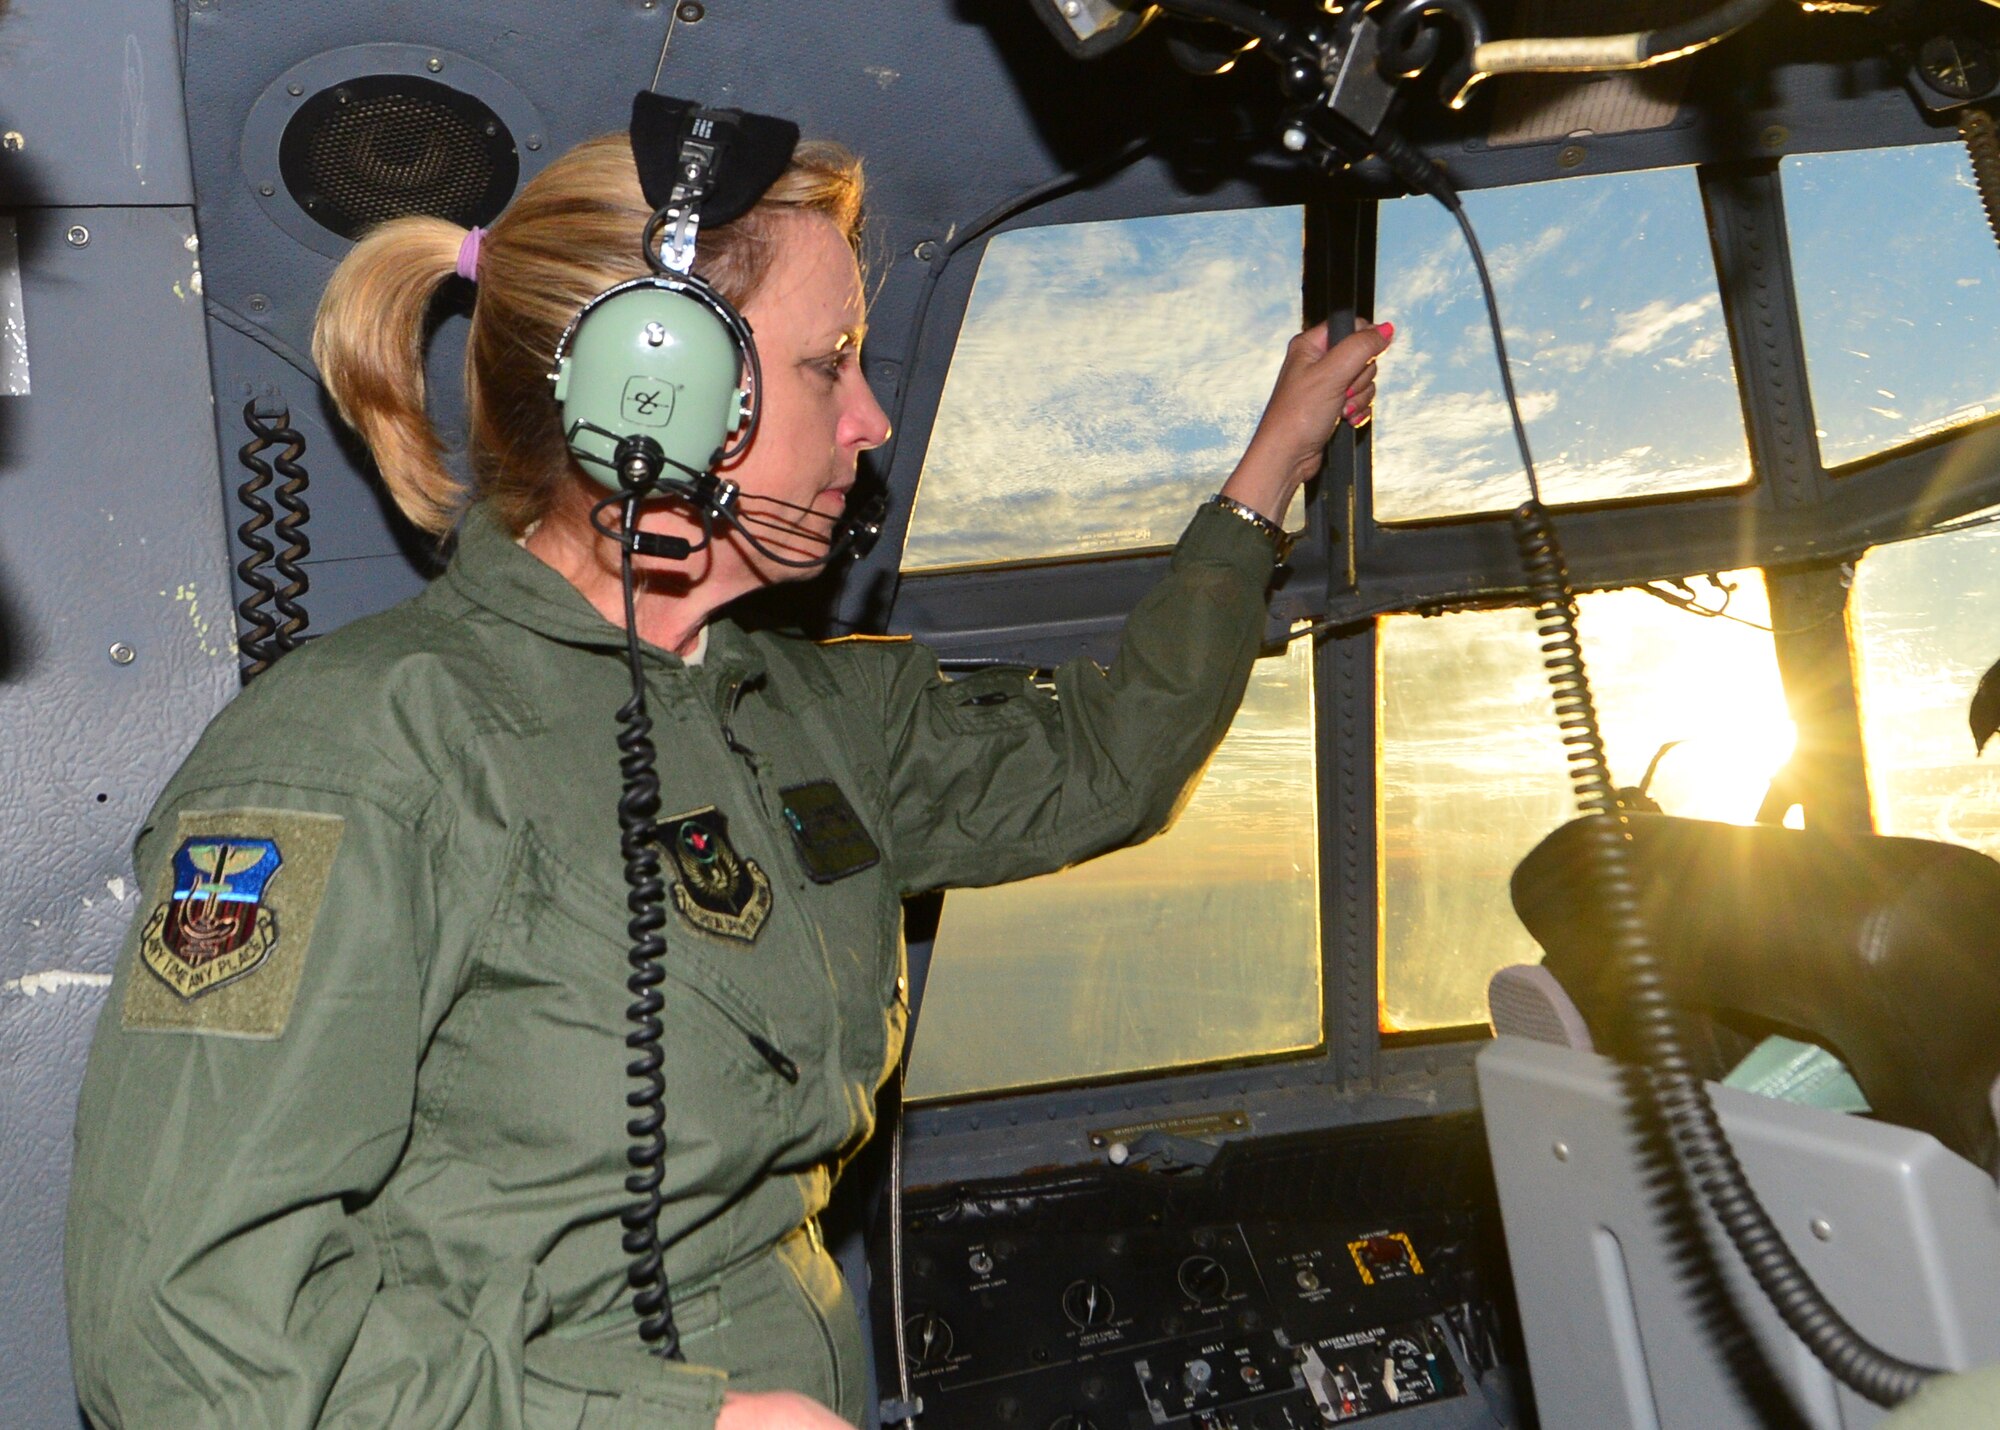 Secretary of the Air Force Deborah Lee James looks out a window on board an AC-130U Spooky Gunship, Oct. 20, 2014. During her two-day visit to Hurlburt Field, Fla., James met with Airmen and got a first-hand look at Air Commando operations. (U.S. Air Force photo/Senior Airman Christopher Callaway)